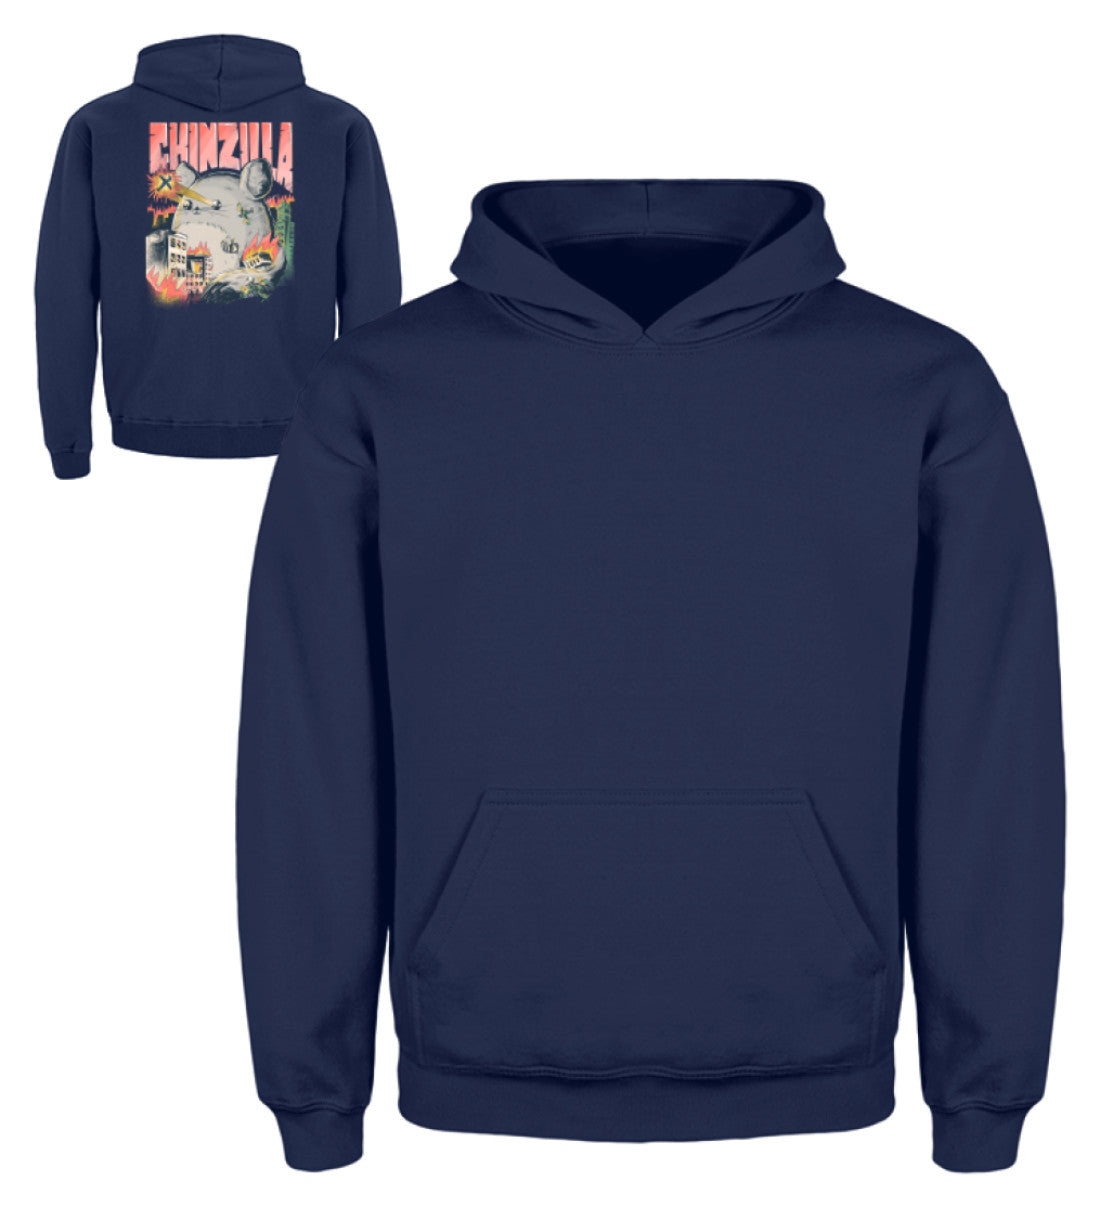 Zeigt chinzilla funny chinchilla owners gift kinder hoodie in Farbe Sky Blue